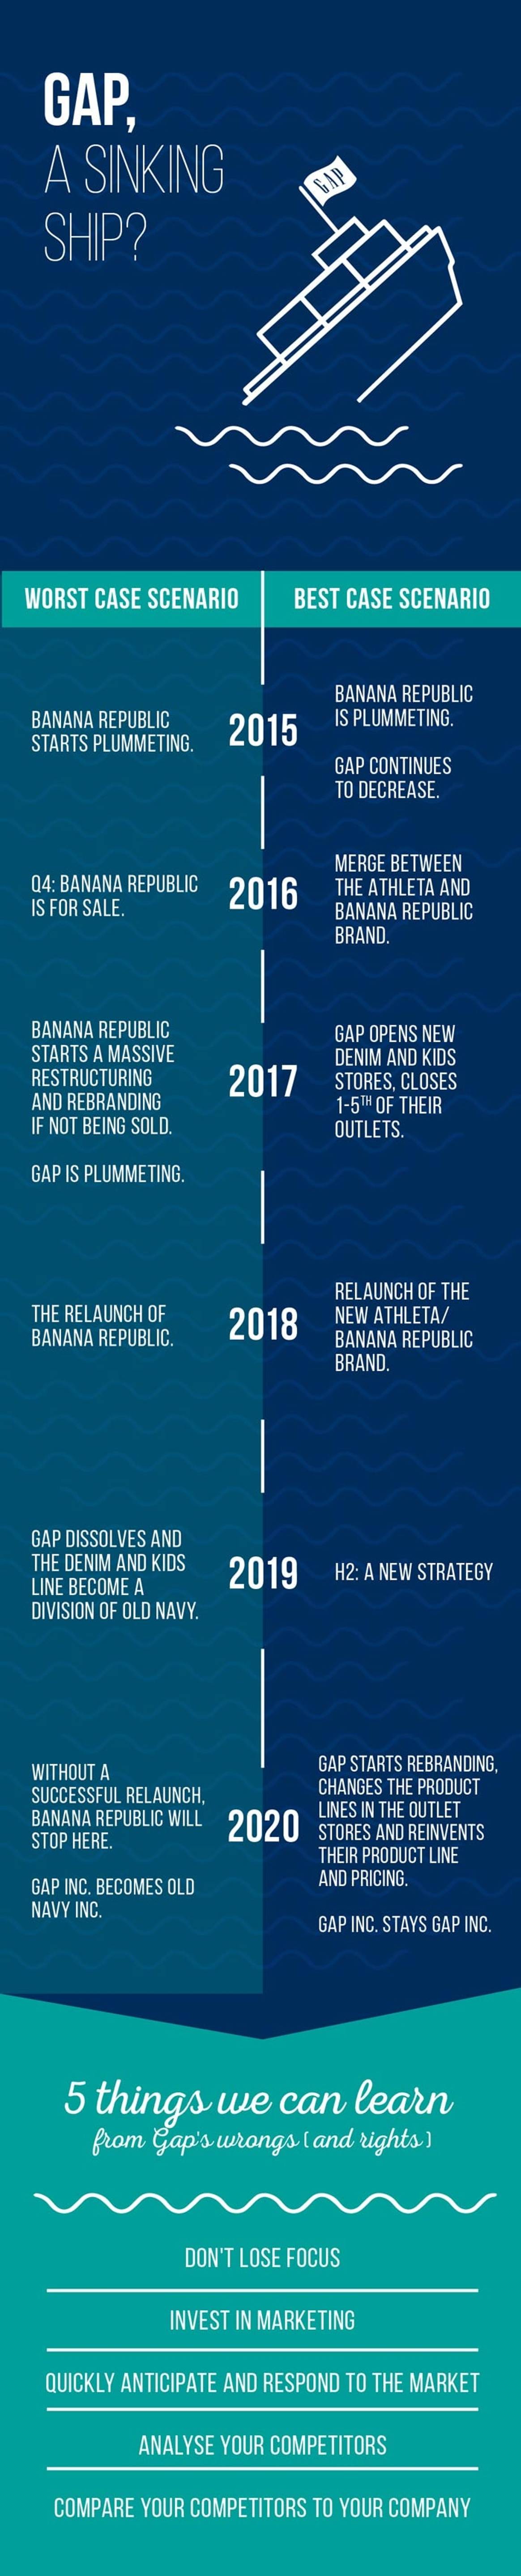 Infographic - Can Gap bounce back after becoming fashion's 'basic' brand?